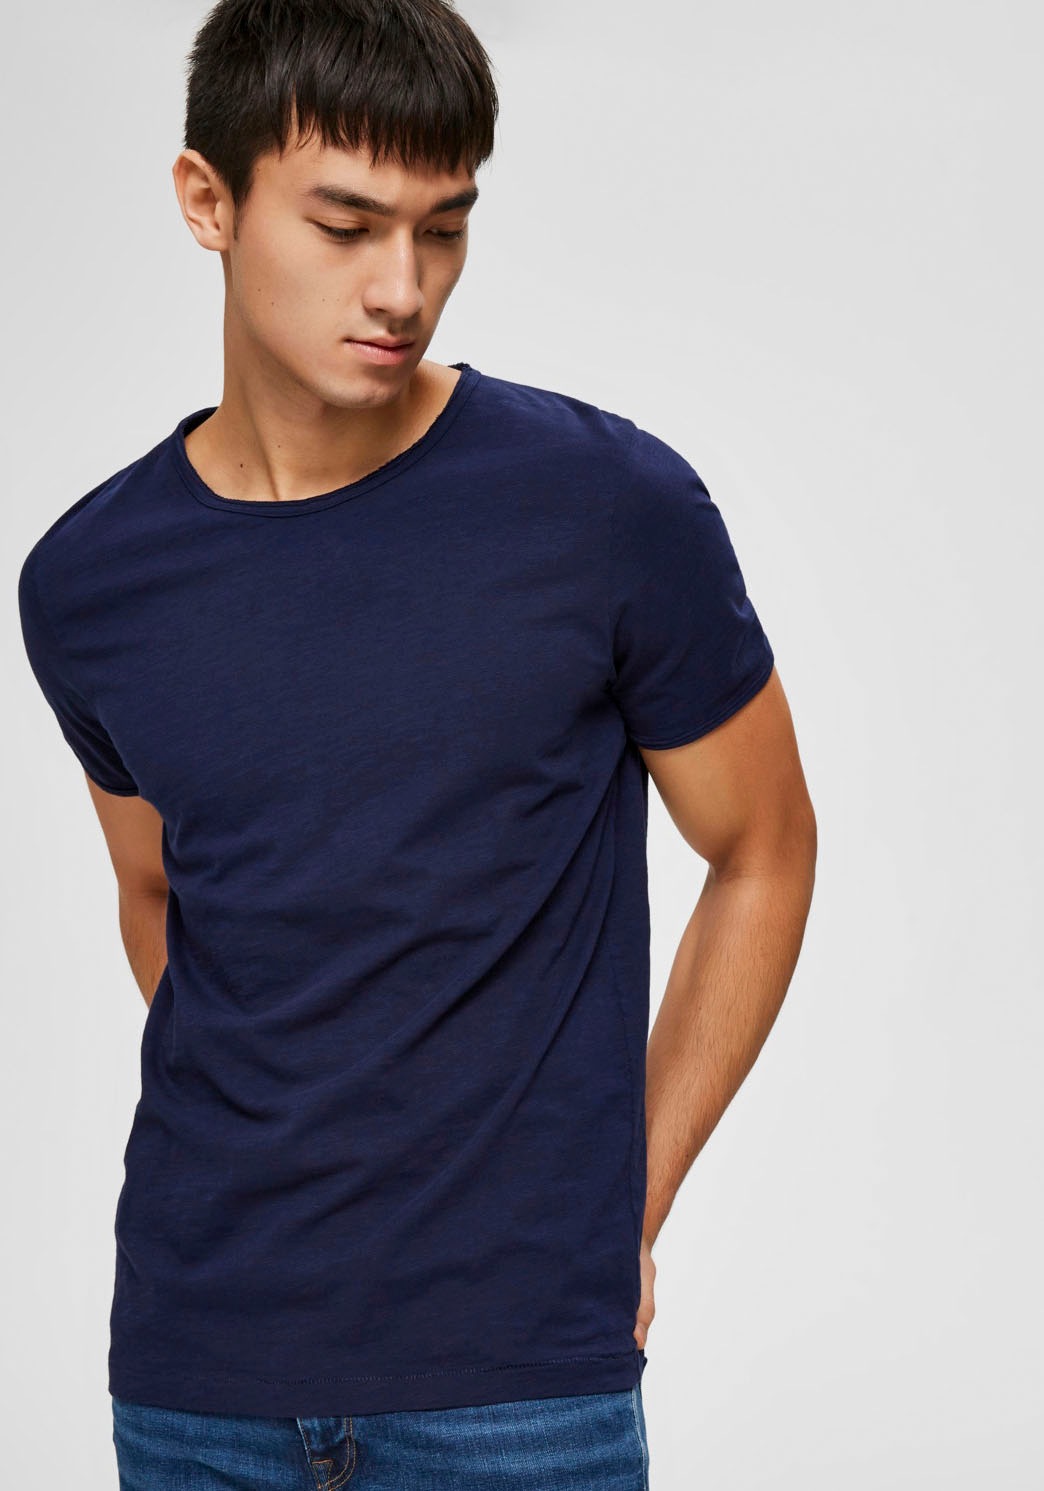 T-Shirt HOMME »MORGAN bei SELECTED kaufen TEE« O-NECK OTTO online